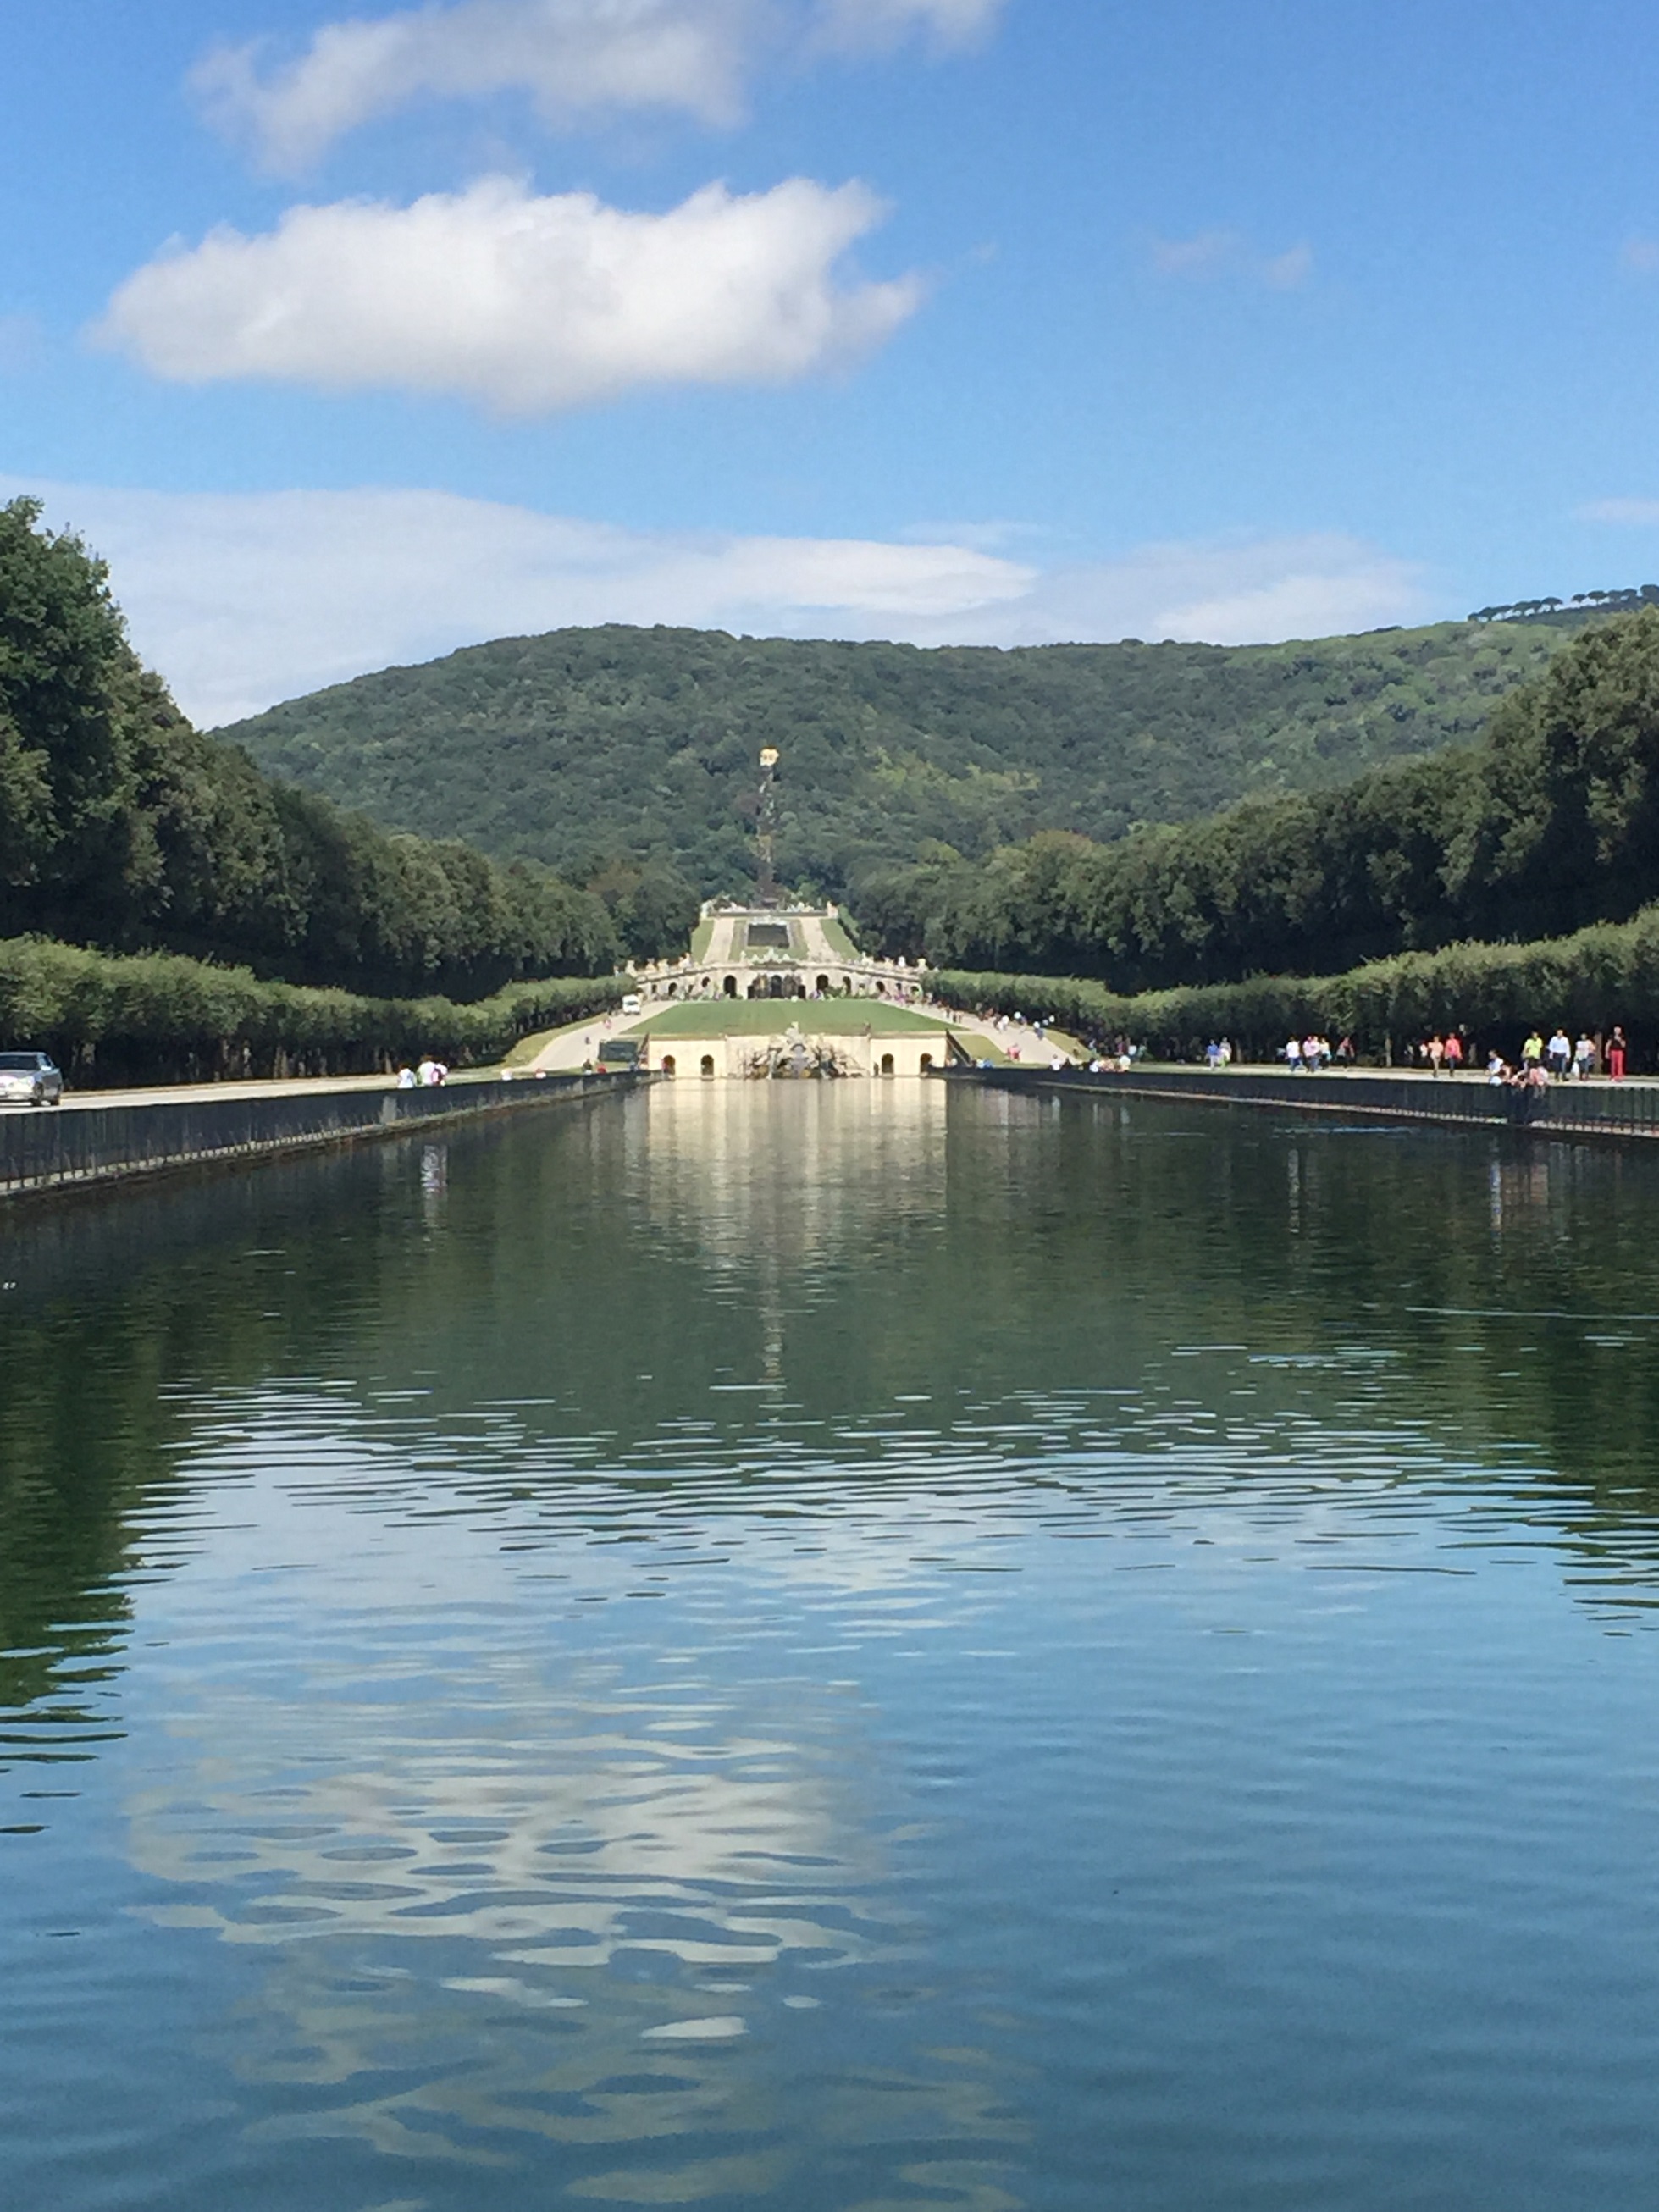 Reggia di Caserta: royalty, faded glory and a lot of waiting around